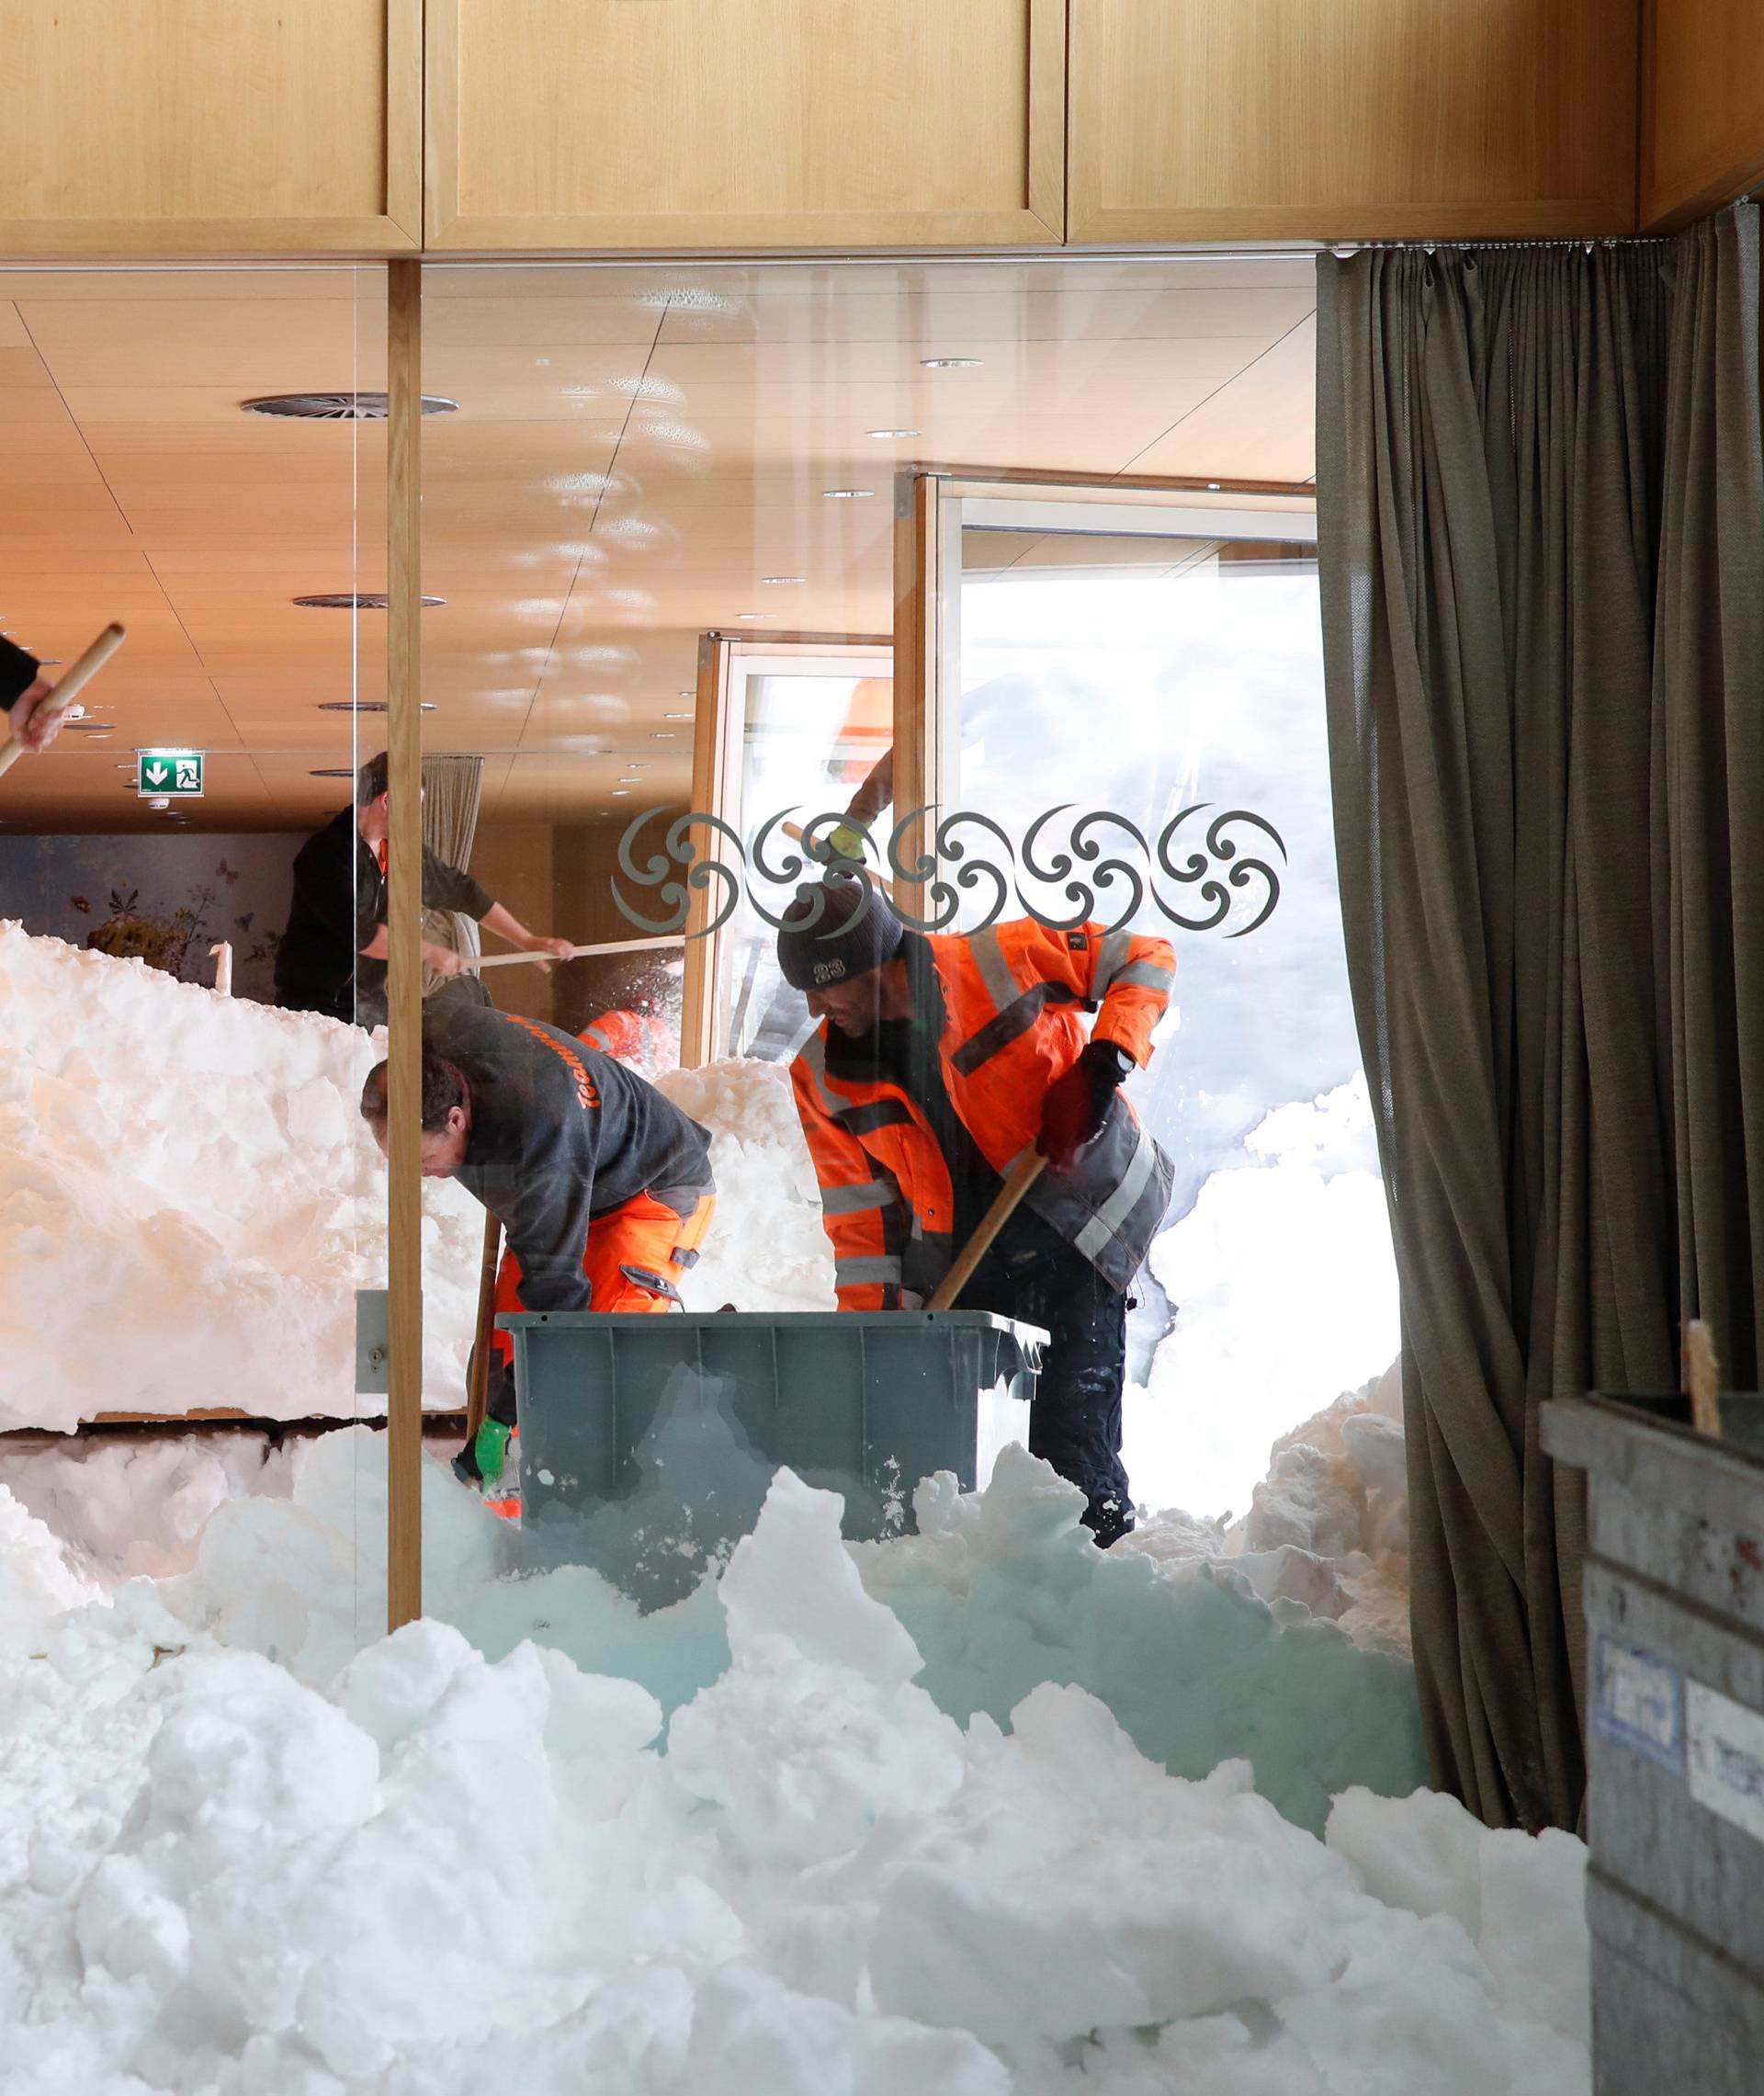 Workers shovel snow out of a restaurant after an avalanche at Santis-Schwaegalp mountain resort